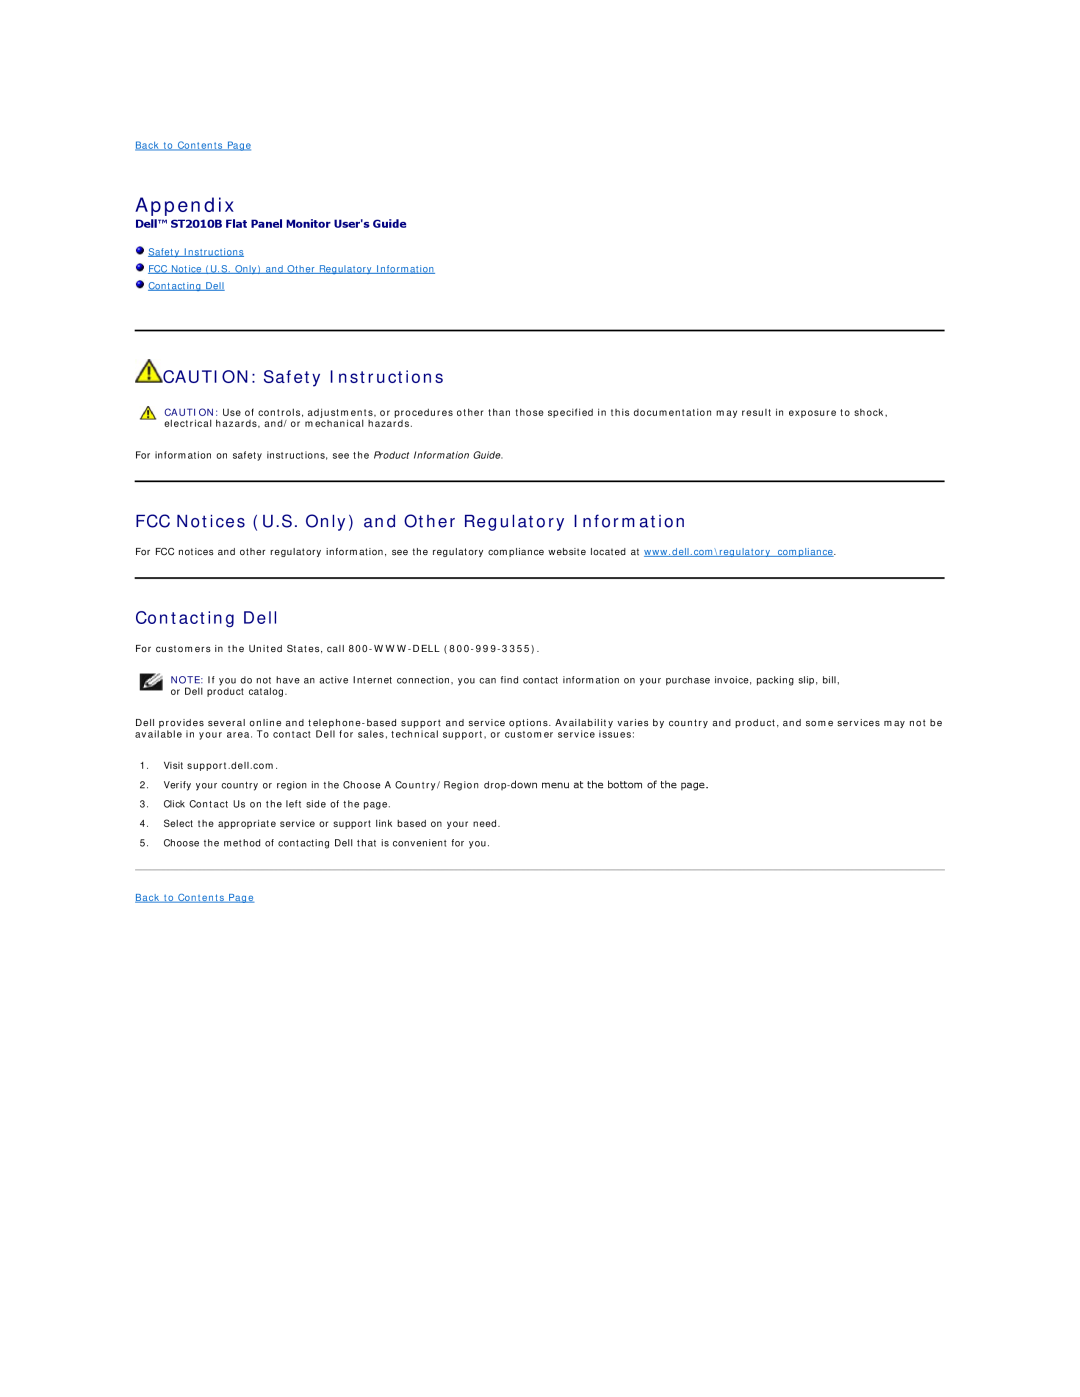 Dell ST2010B appendix Appendix, CAUTION Safety Instructions, FCC Notices U.S. Only and Other Regulatory Information 